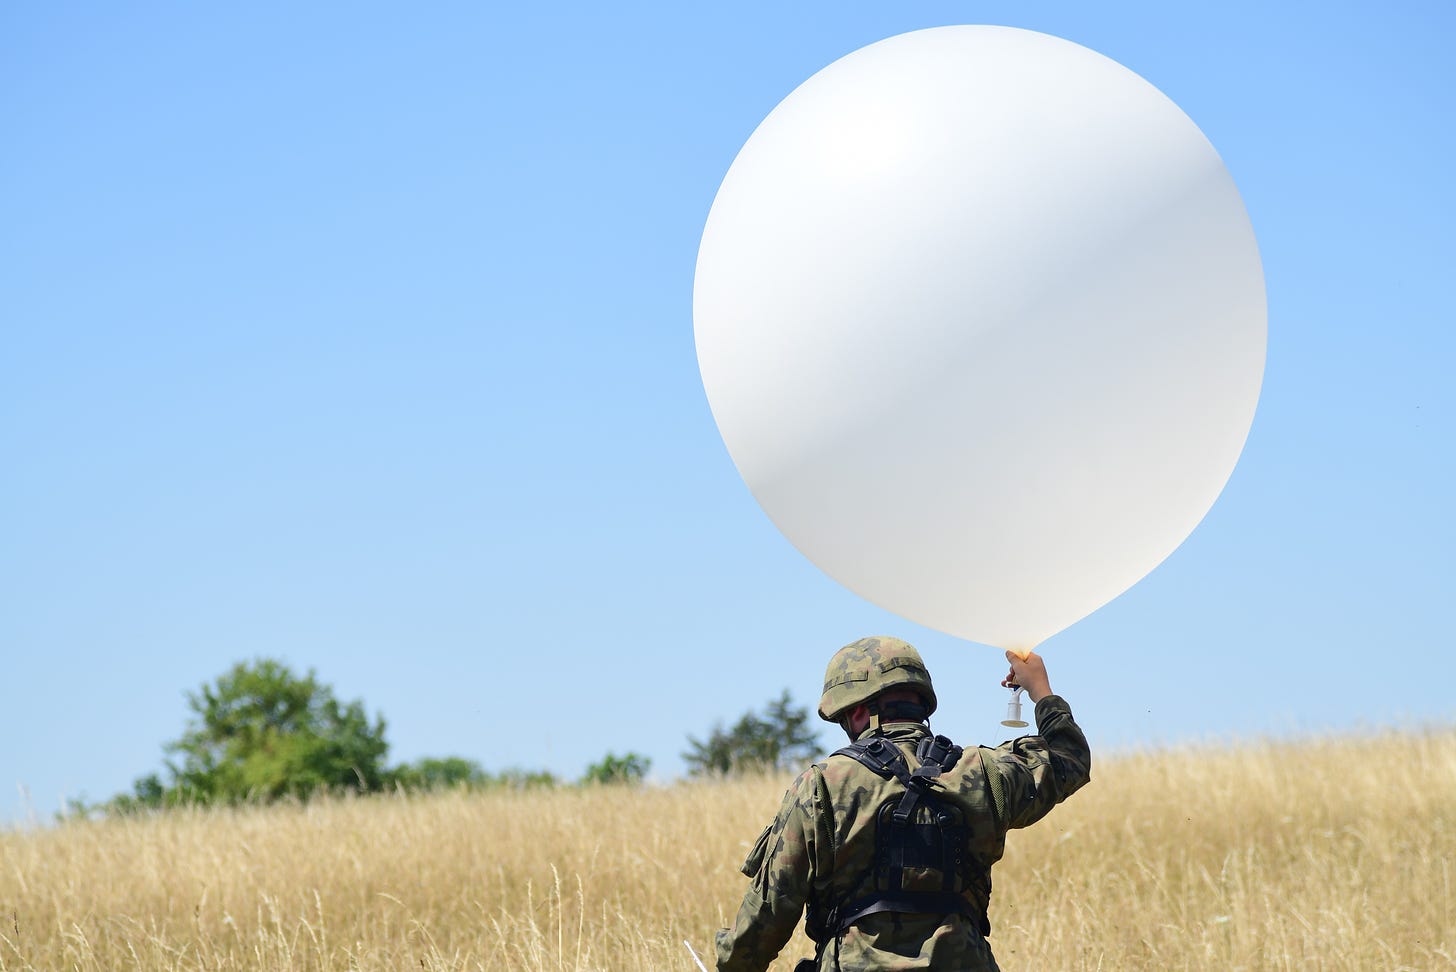 Polish soldiers assigned to 2nd Battalion, 5th Artillery Brigade, prepare to launch a meteorological balloon prior to the unit conducting a fire mission with their AHS Krab self-propelled howitzers as part of exercise Dynamic Front 22 (DF 22) at the 7th Army Training Command's Grafenwoehr Training Area, Germany, July 18, 2022. DF22, led by 56th Artillery Command and U.S. Army Europe and Africa directed, is the premier U.S. led NATO Allied and Partner integrated fires exercise in the European Theater focusing on fires interoperability and increasing readiness, lethality and interoperability across the human, procedural, and technical domains.(U.S. Army photo by Kevin Sterling Payne) 